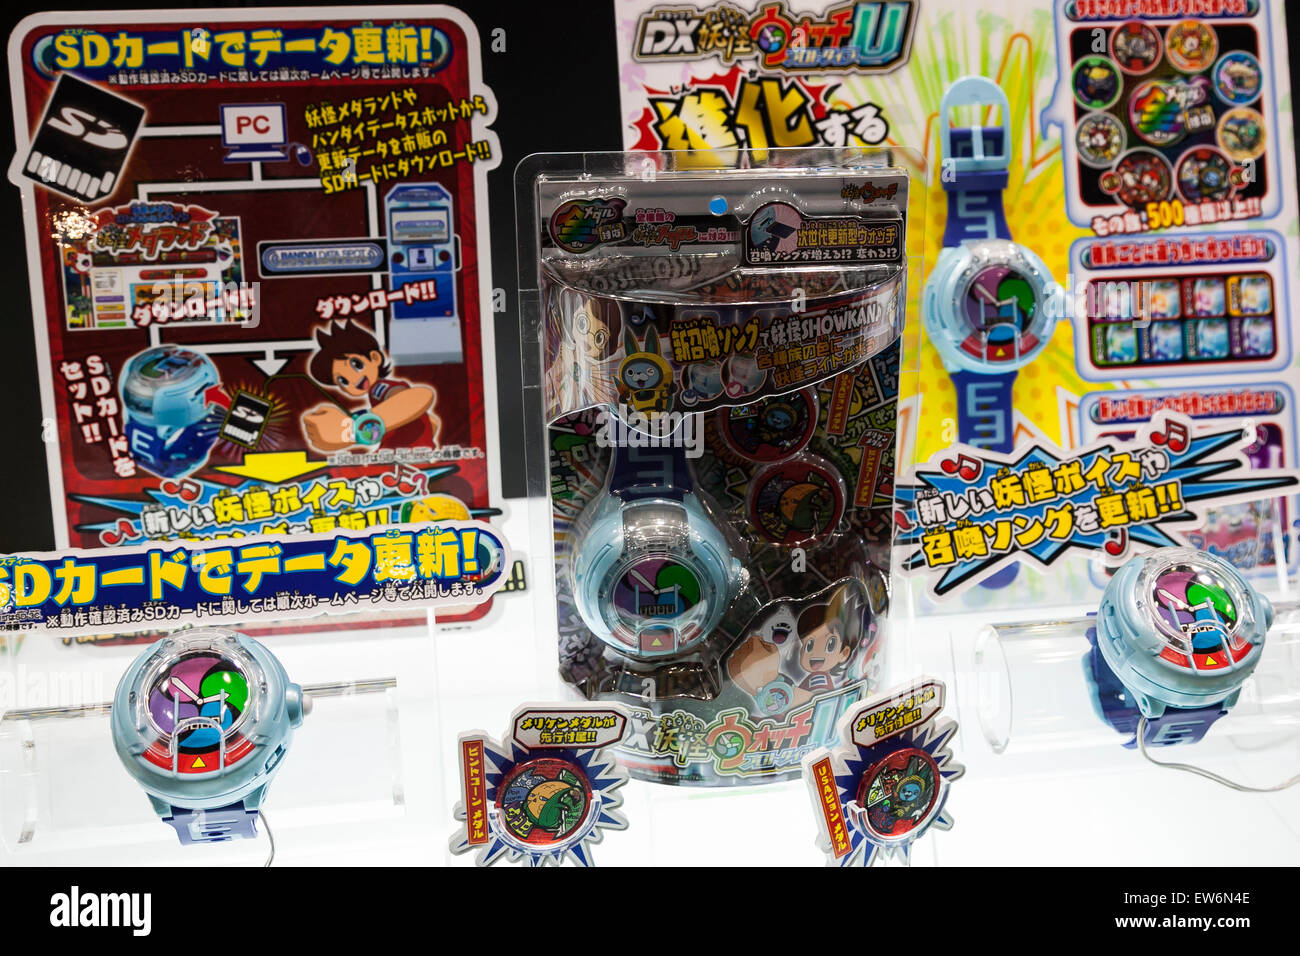 Bandai Namco exhibits a ''DX Yokai Watch Zero Shiki Type Gost Yo-kai Youkai'' at the International Tokyo Toy Show 2015 in Tokyo Big Sight on June 18, 2015, Tokyo, Japan. Japan's largest trade show for toy makers attracts buyers and collectors by introducing the latest products from different toymakers from Japan and overseas. The toy fair showcases about 35,000 toys from 149 domestic and foreign companies and is held over four days. © Rodrigo Reyes Marin/AFLO/Alamy Live News Stock Photo